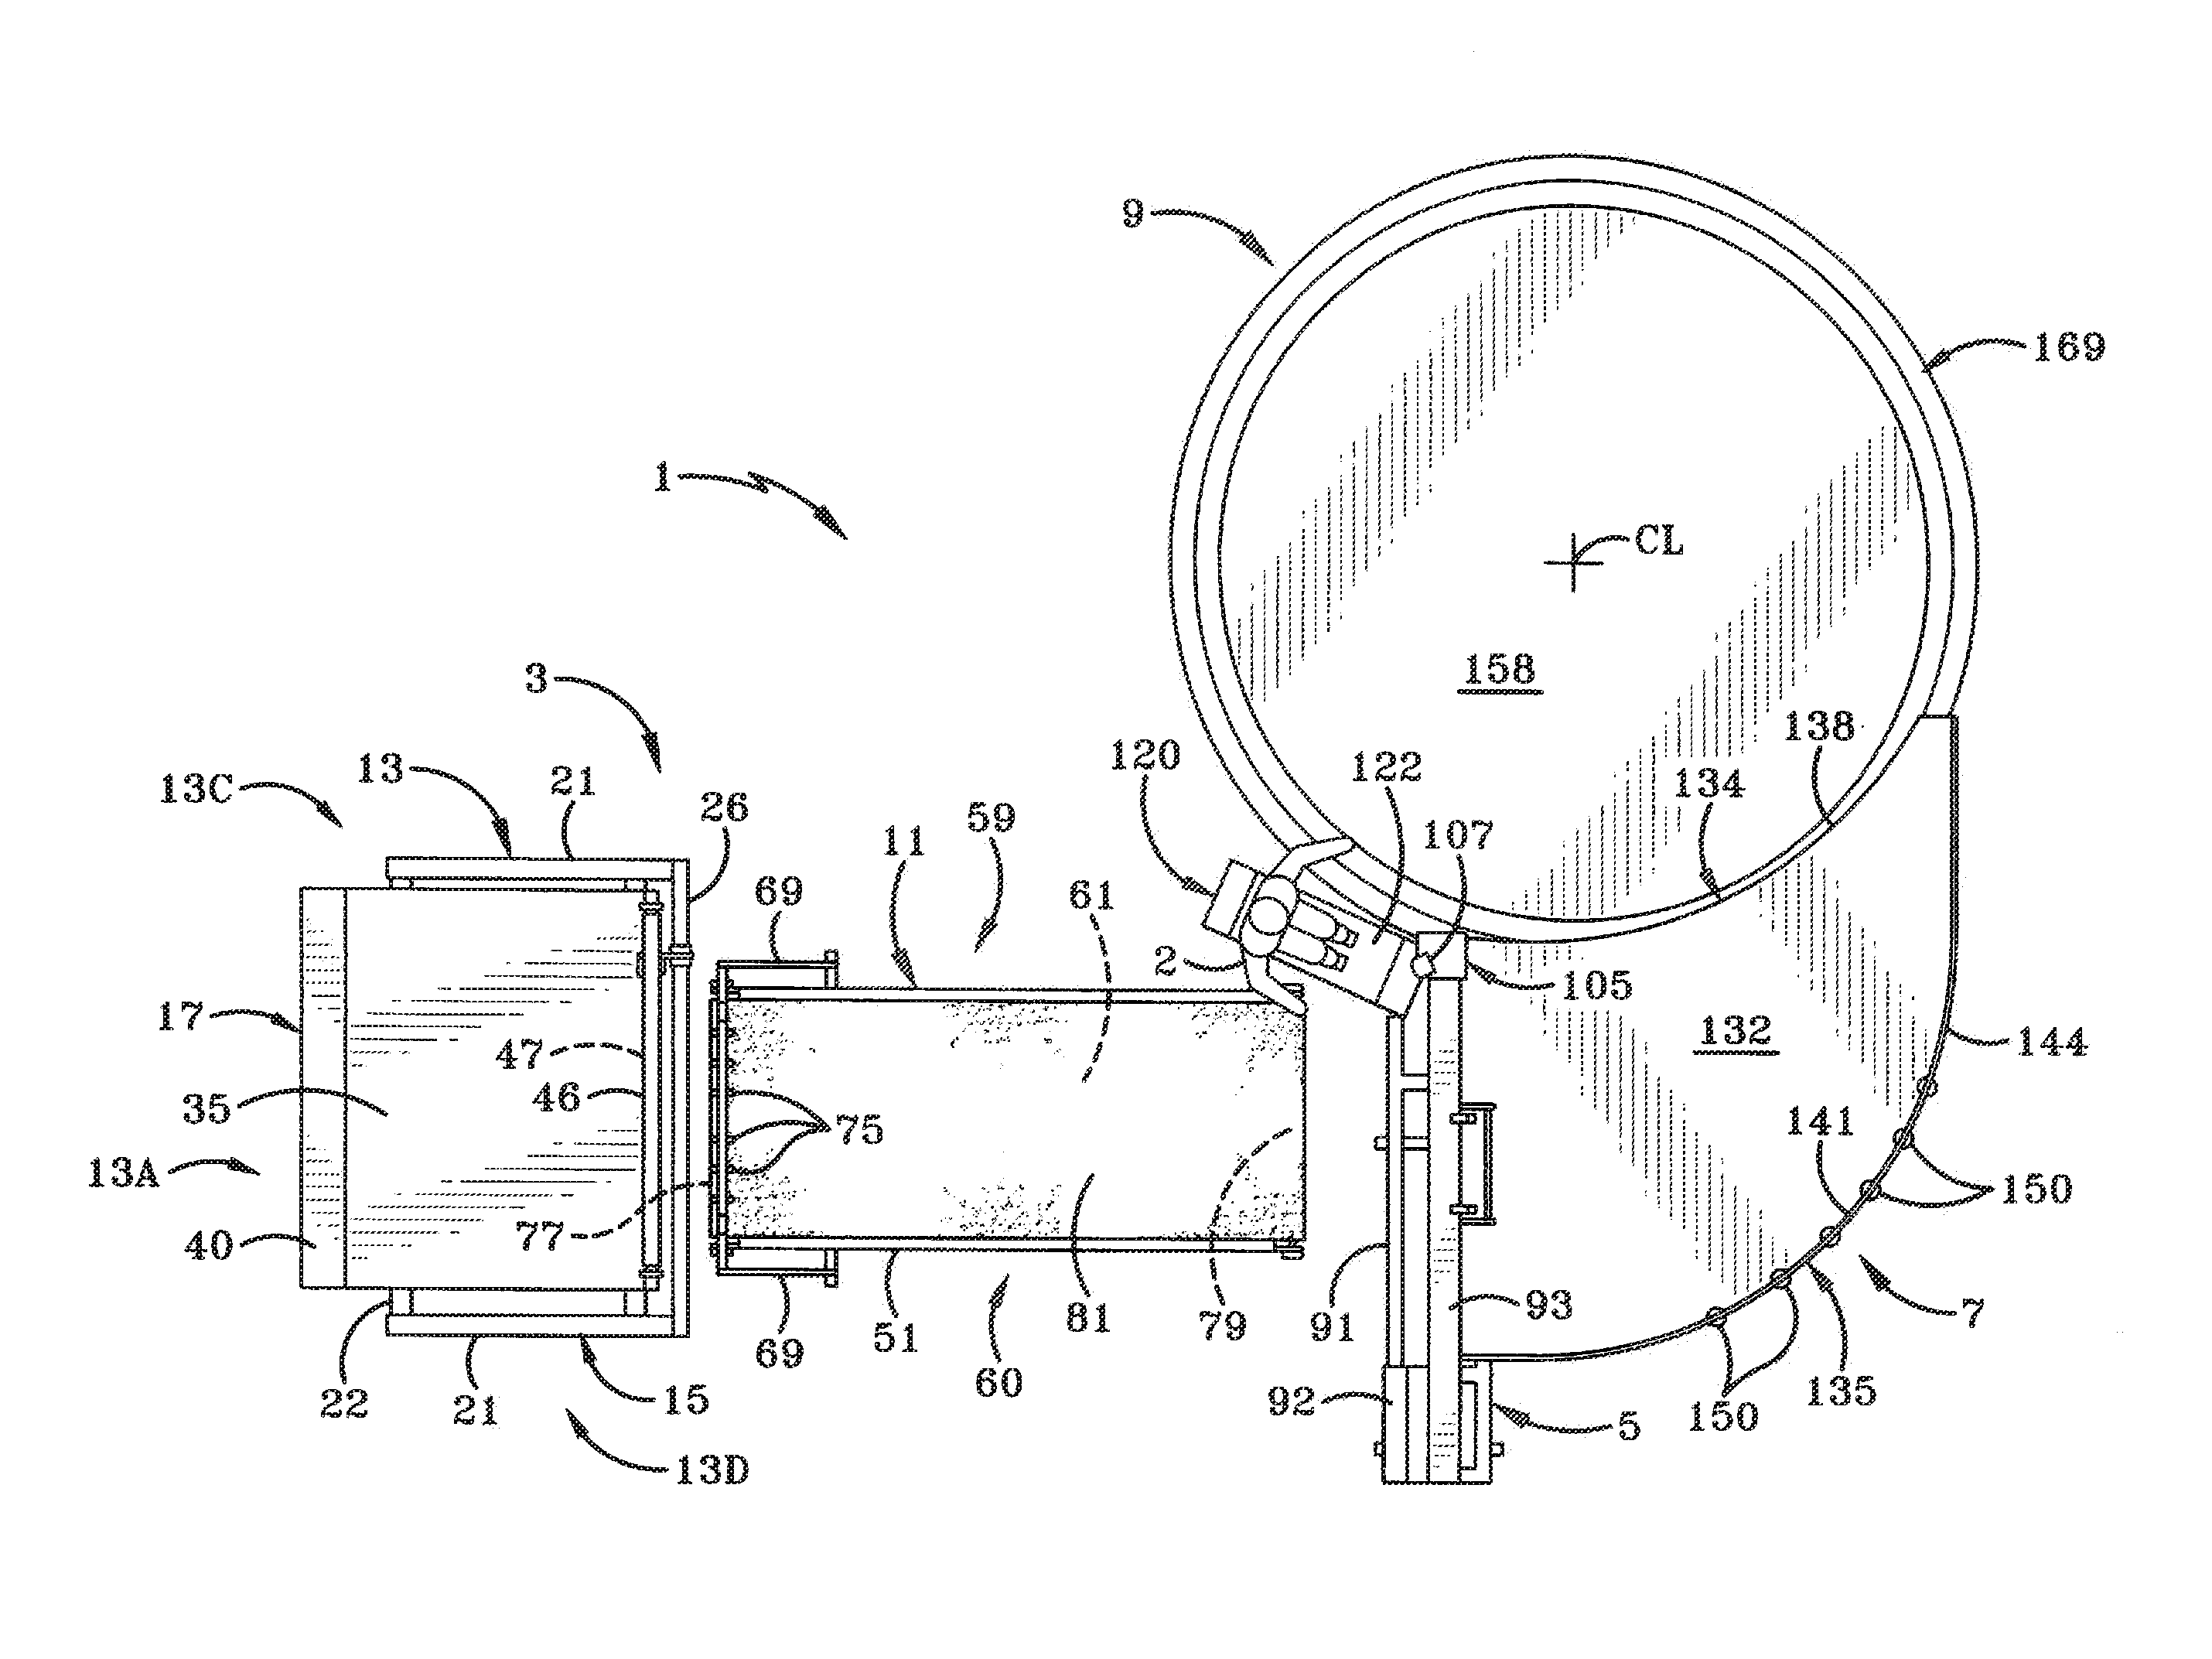 Method and apparatus for welding a curved seam